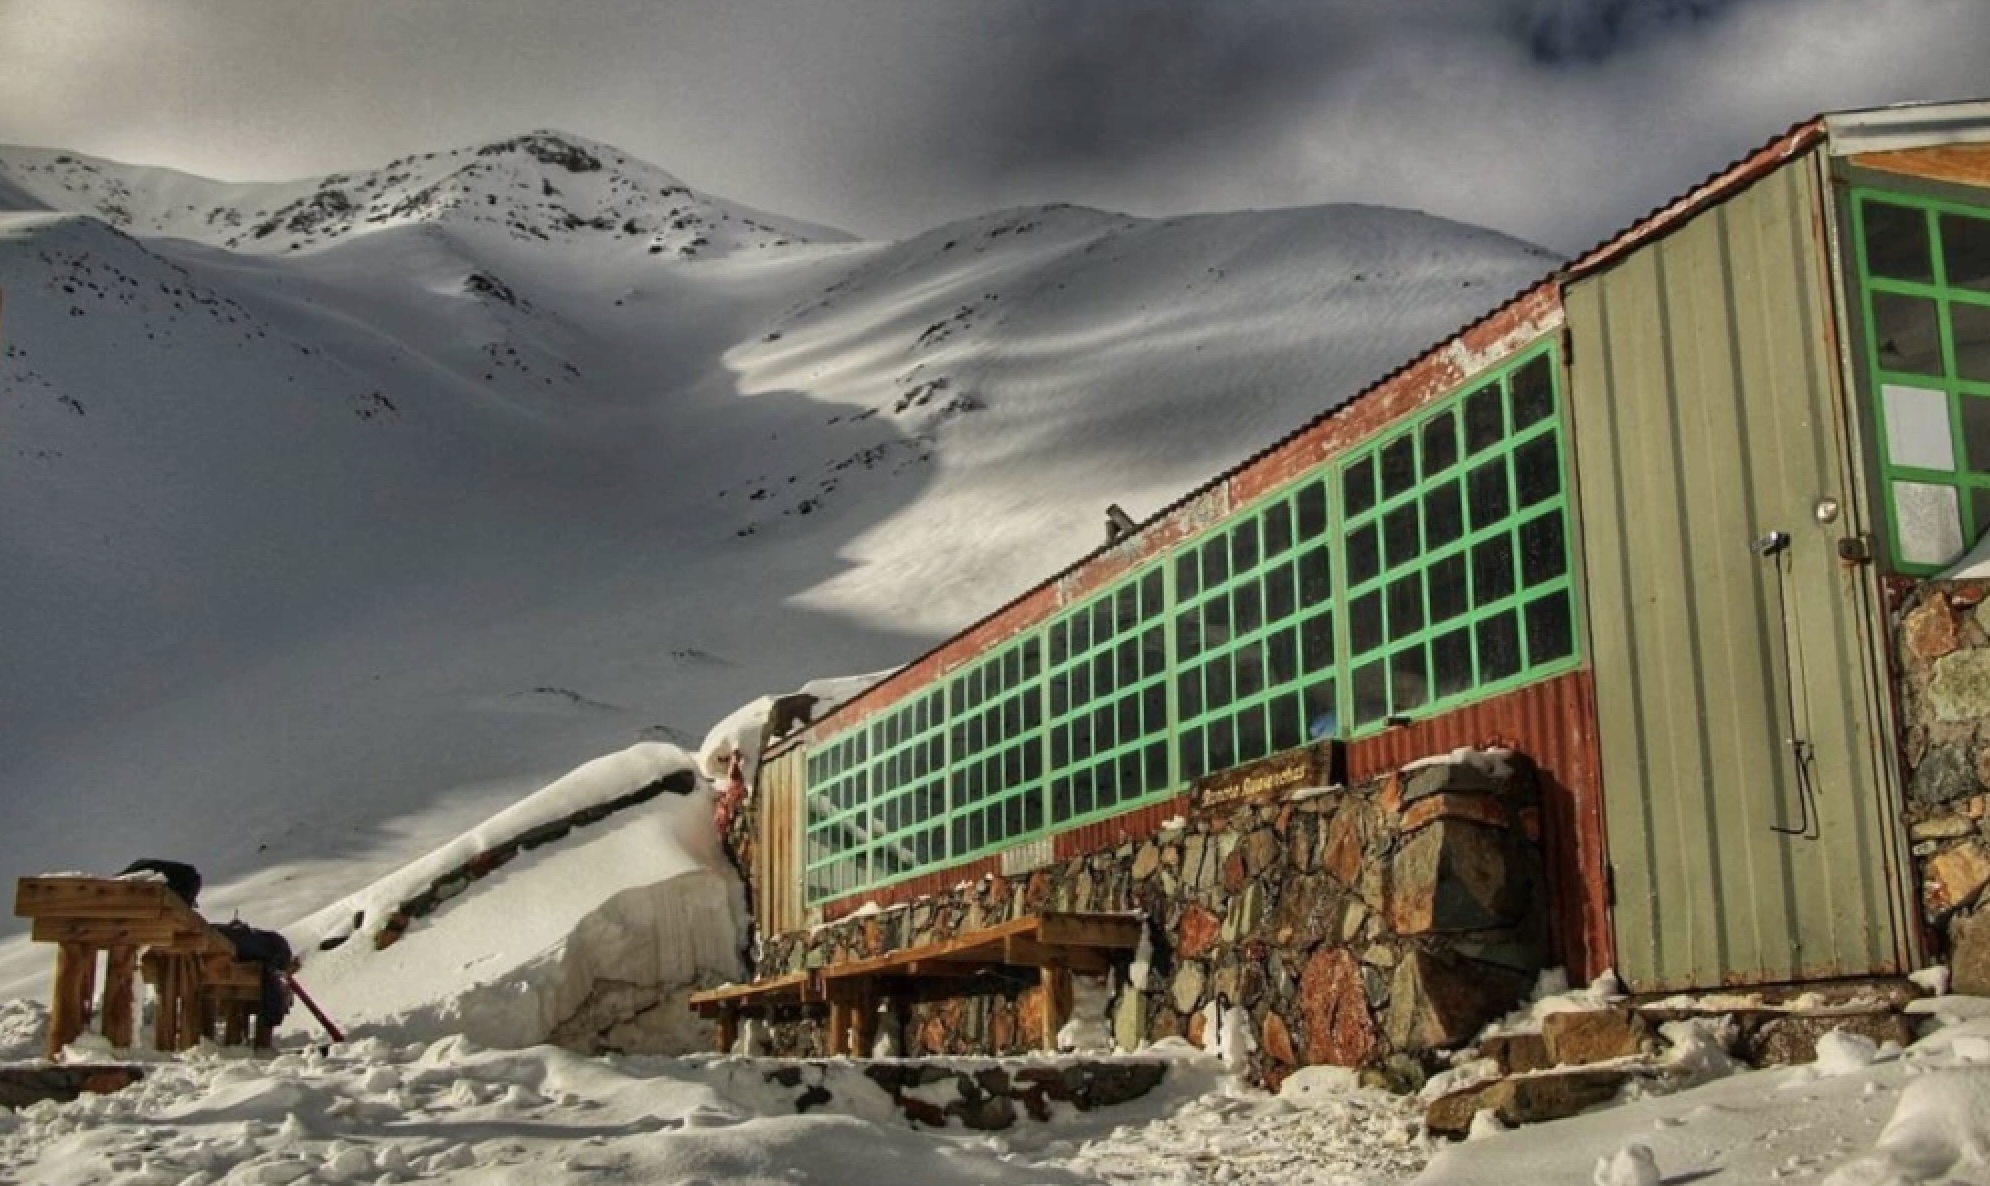 Ski Arpa, Chile To Reopen After 4 Years Of Closure